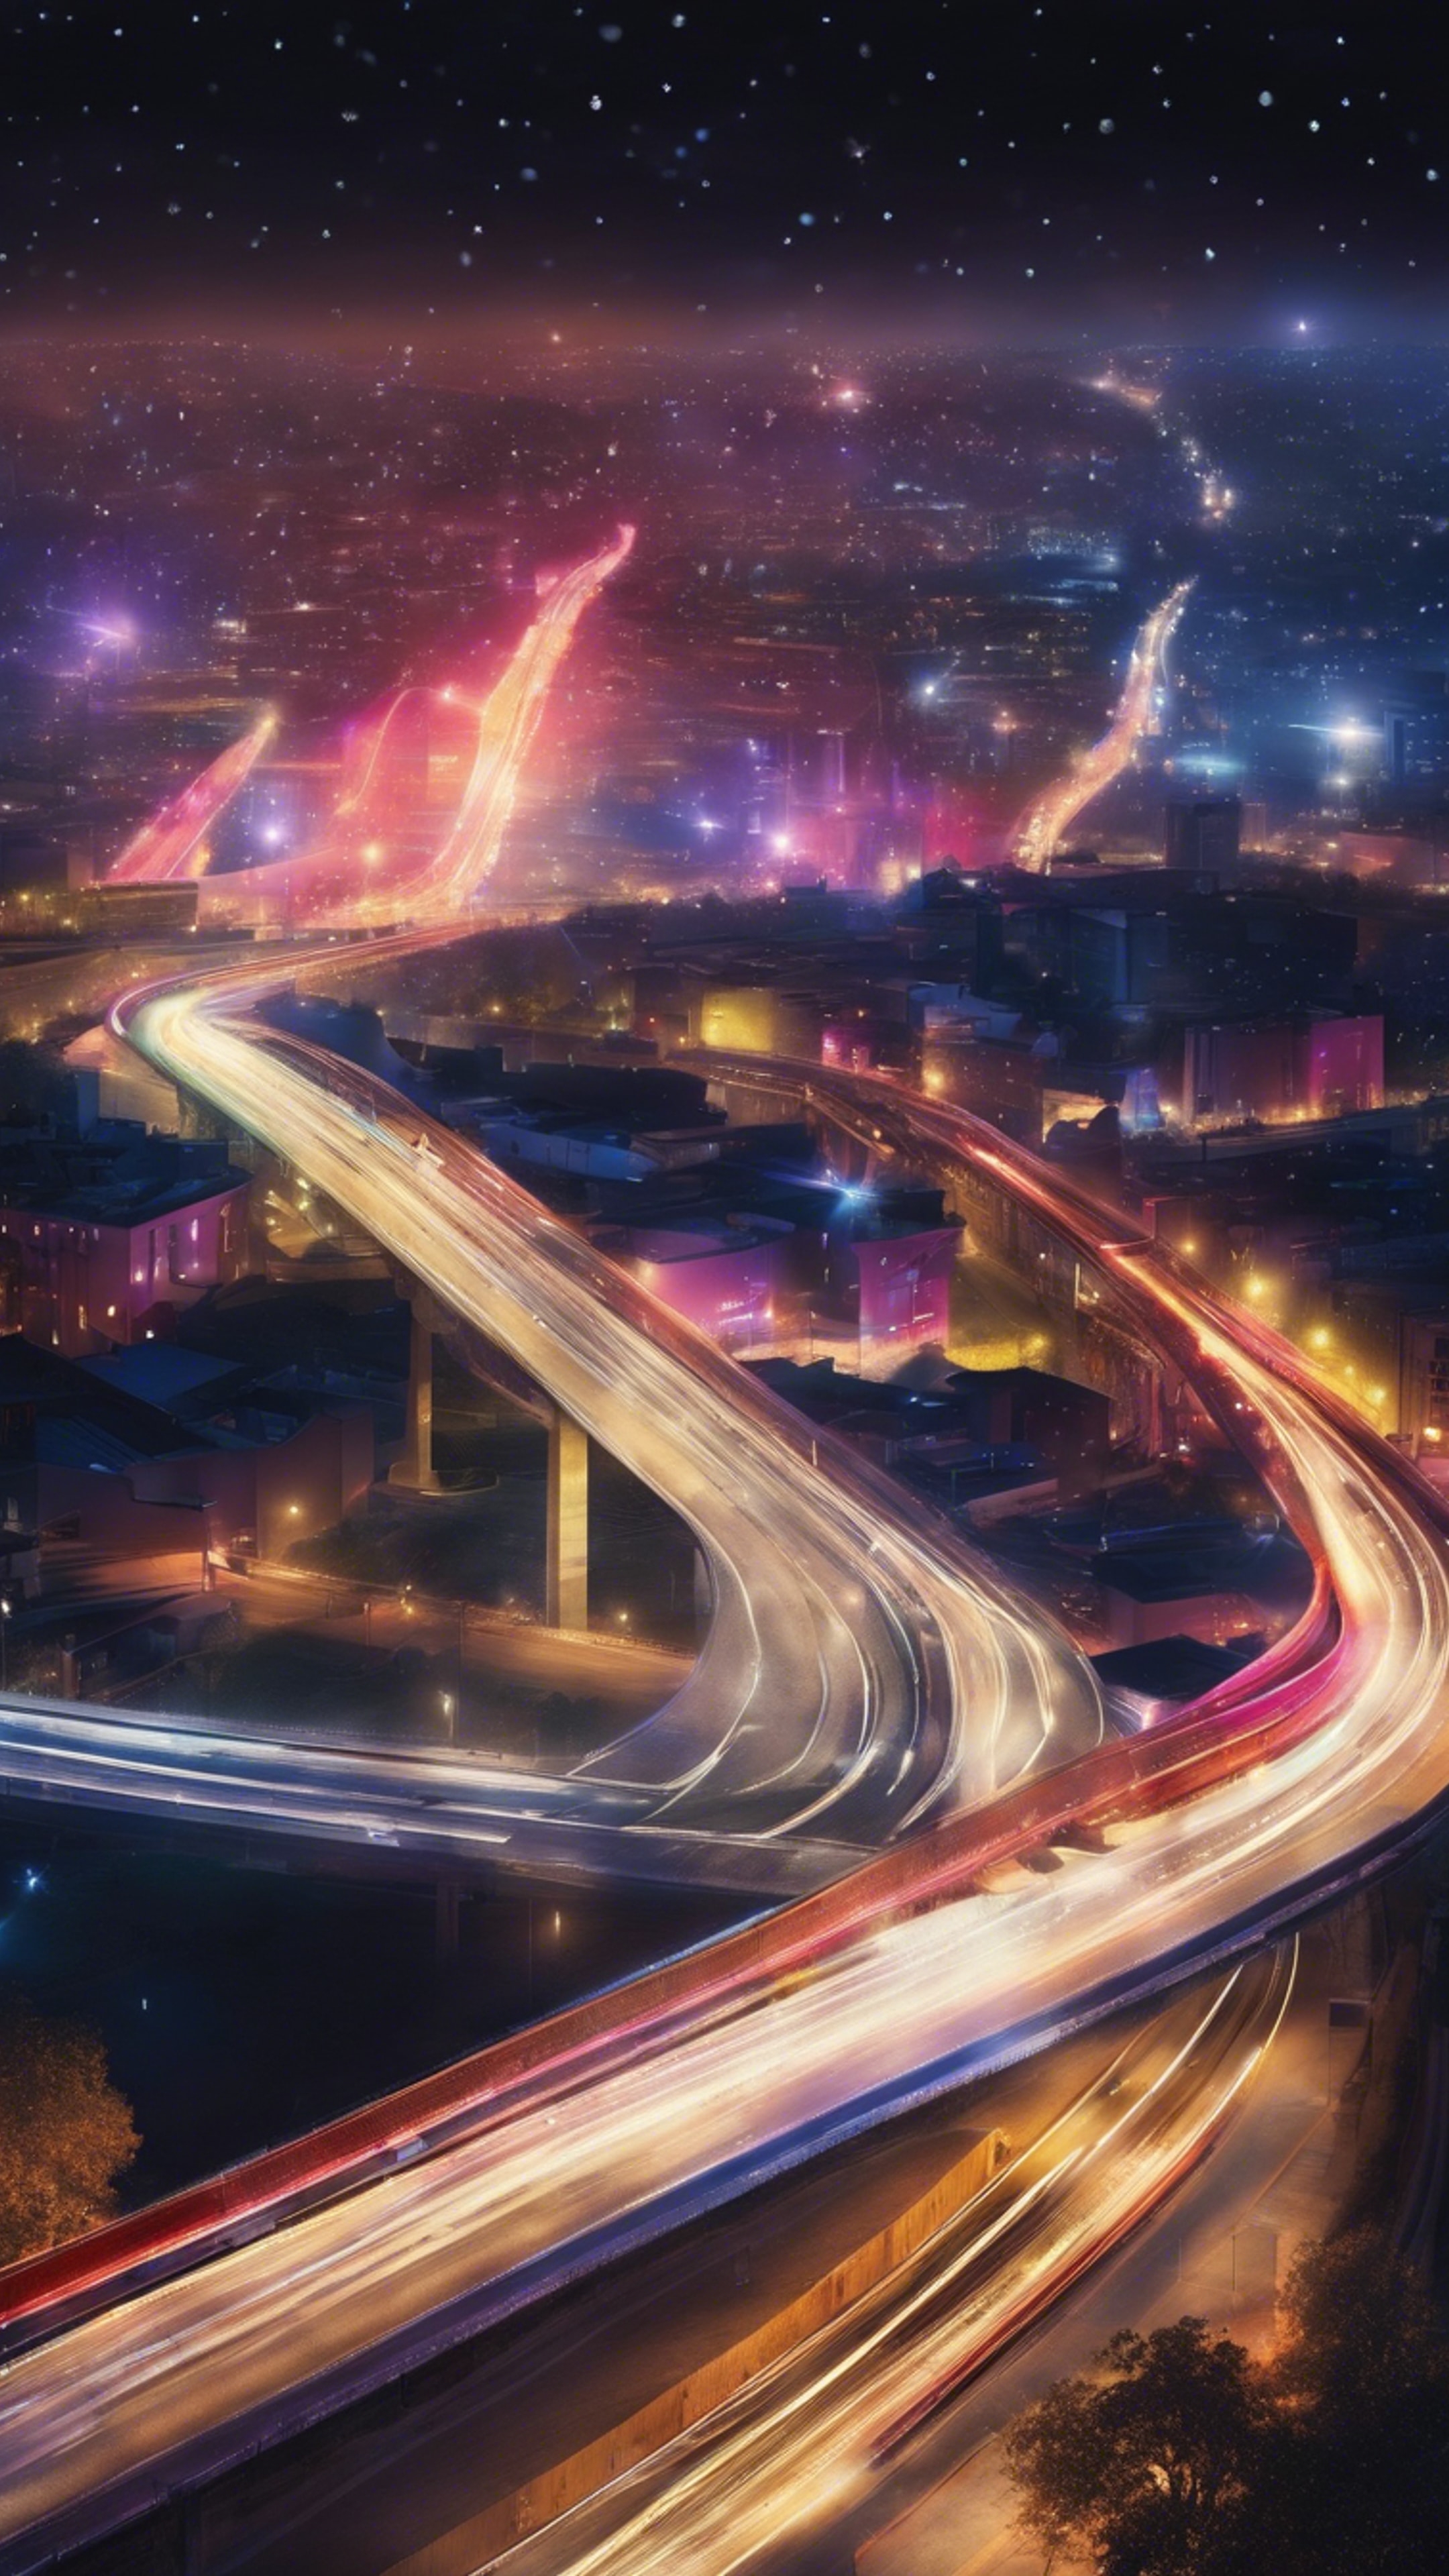 A lustrous highway painting a ribbon of light through the city under the vivid colors of a nocturnal sky. Тапет[7f6125f7f59b411d957d]